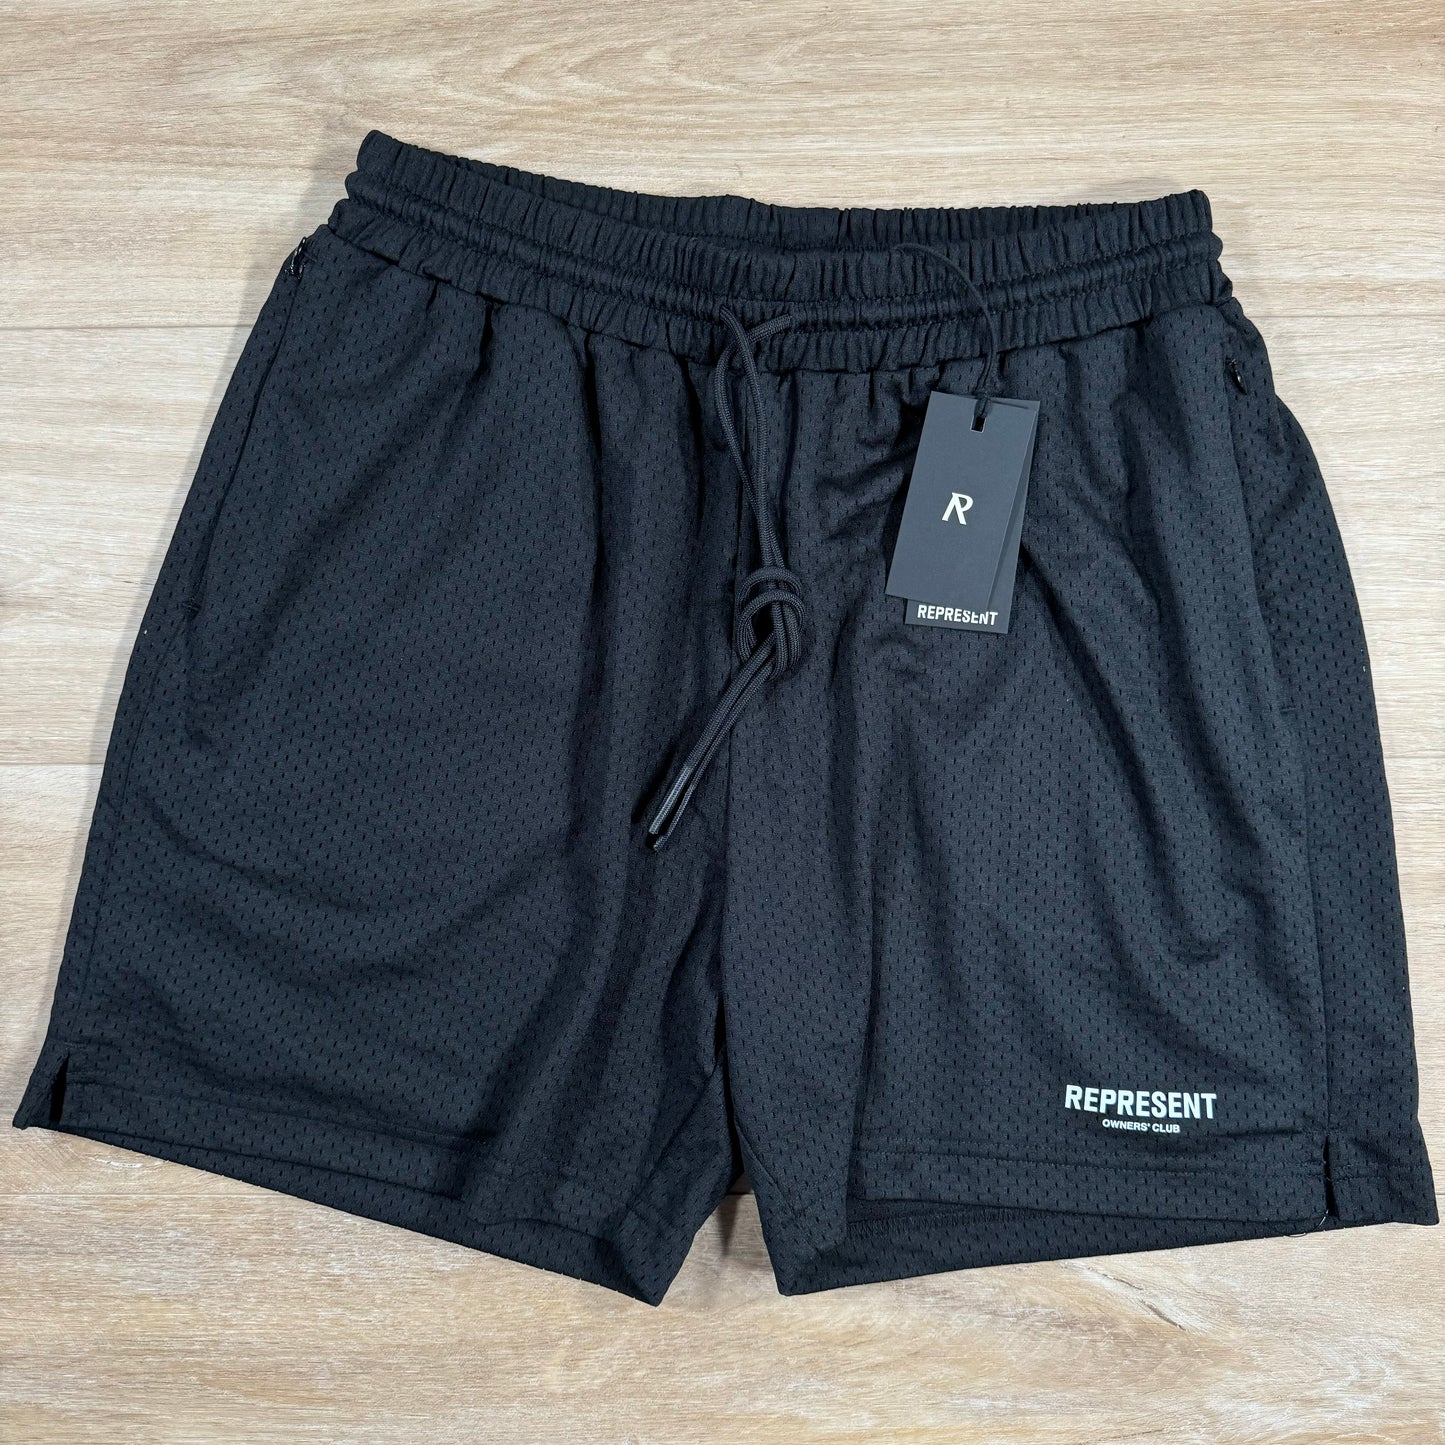 Represent Owners Club Mesh Shorts in Black